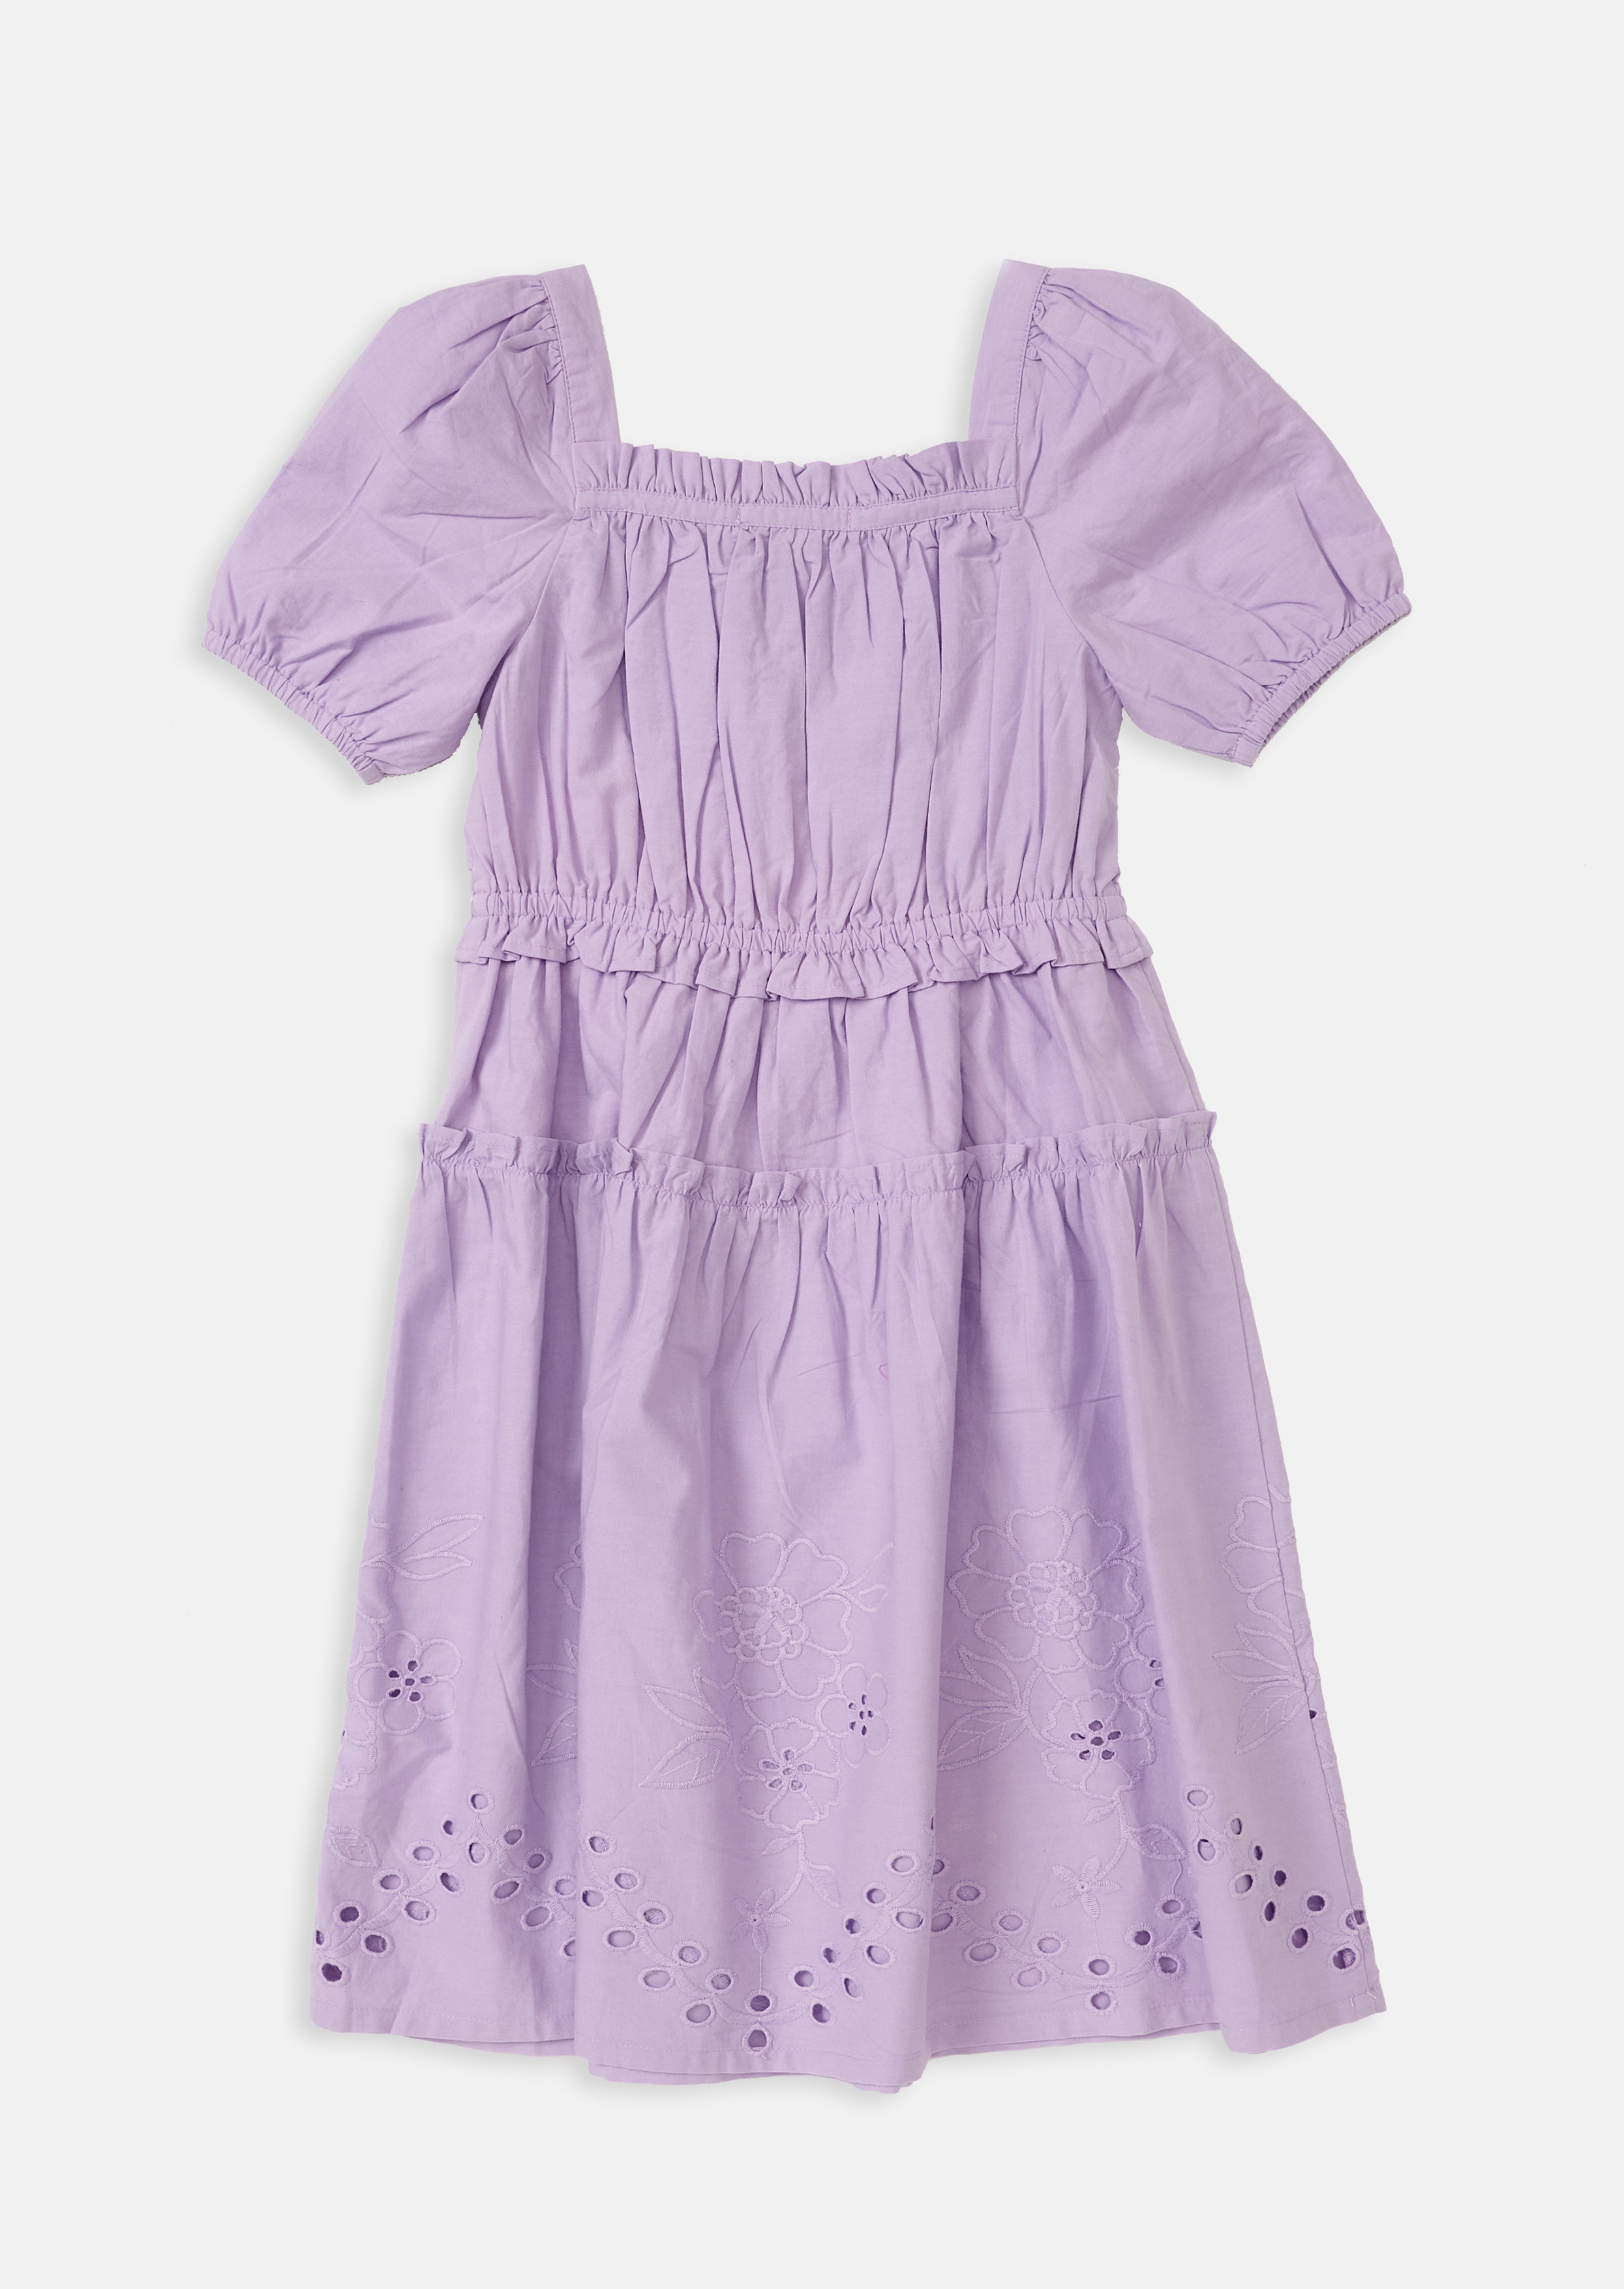 Girls Floral Embroidered Violet Dress with Puff Sleeves